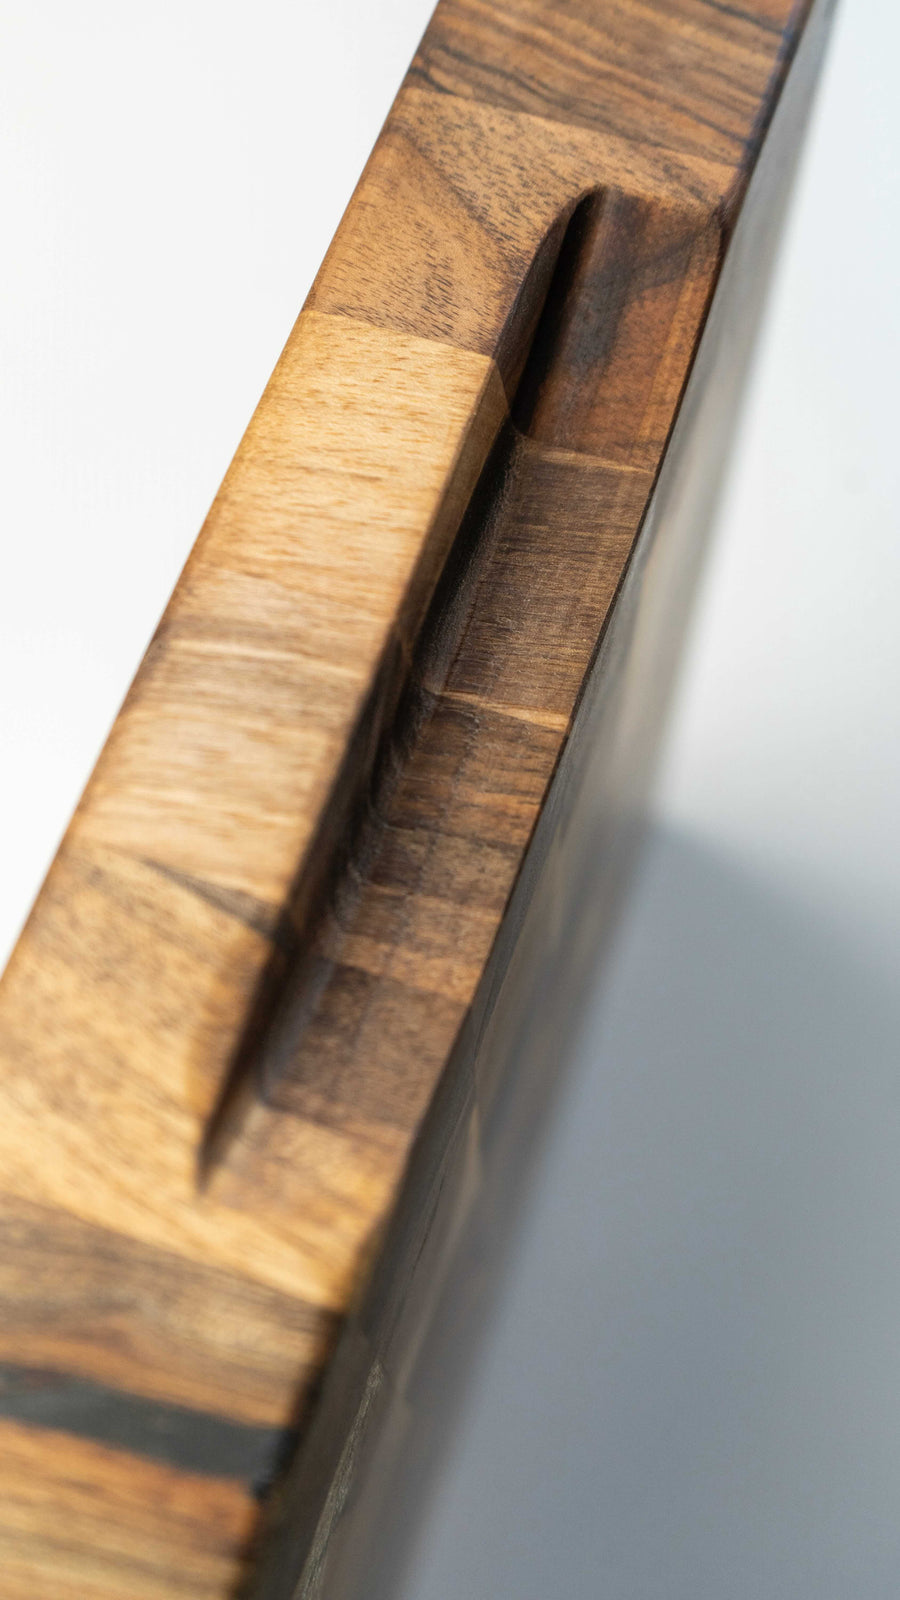 end grain walnut cutting board, handmade in Slovenia. Pictured: side of the board with the carved handle.